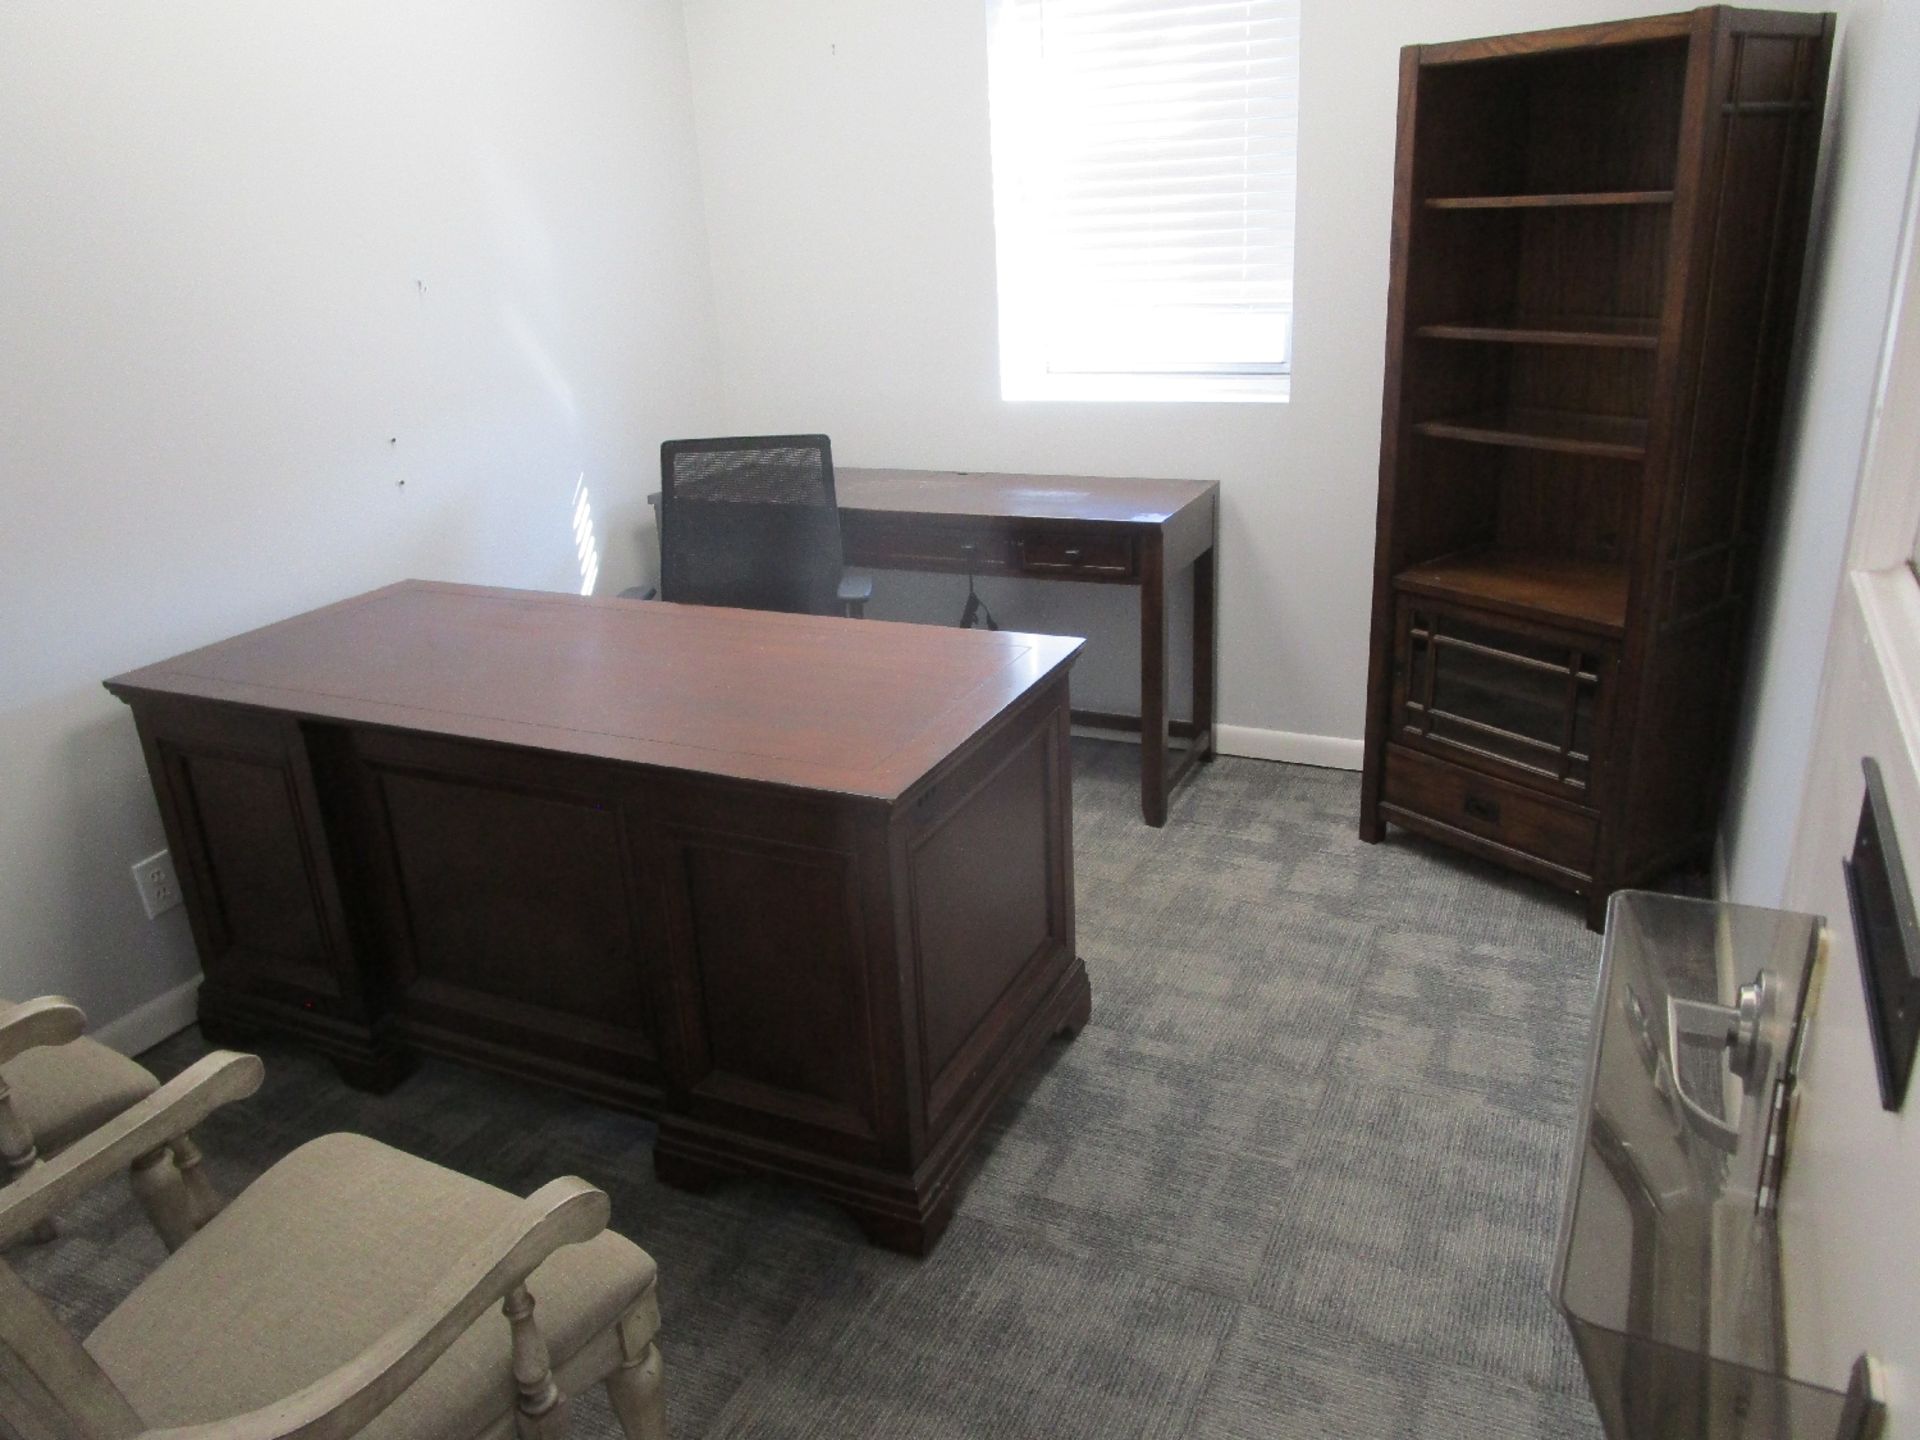 Lot of Executive Office Furniture - Image 5 of 5